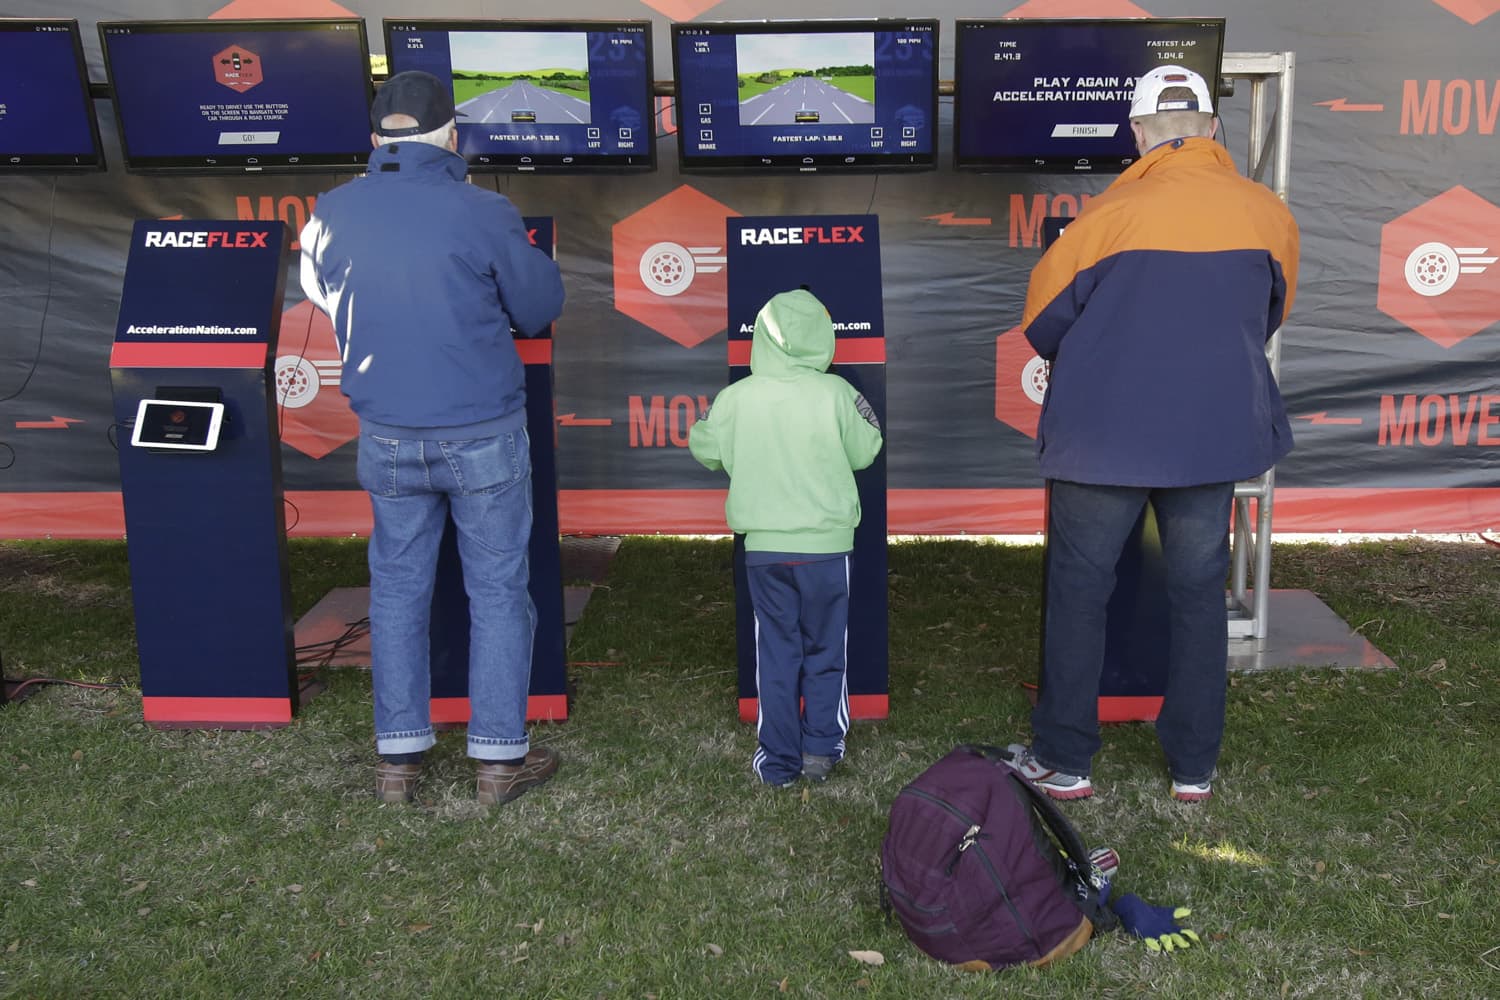 In this file photo, adults as well as kids enjoy a racing video game at the NASCAR Acceleration Nation interactive display at Daytona International Speedway. (John Raoux)